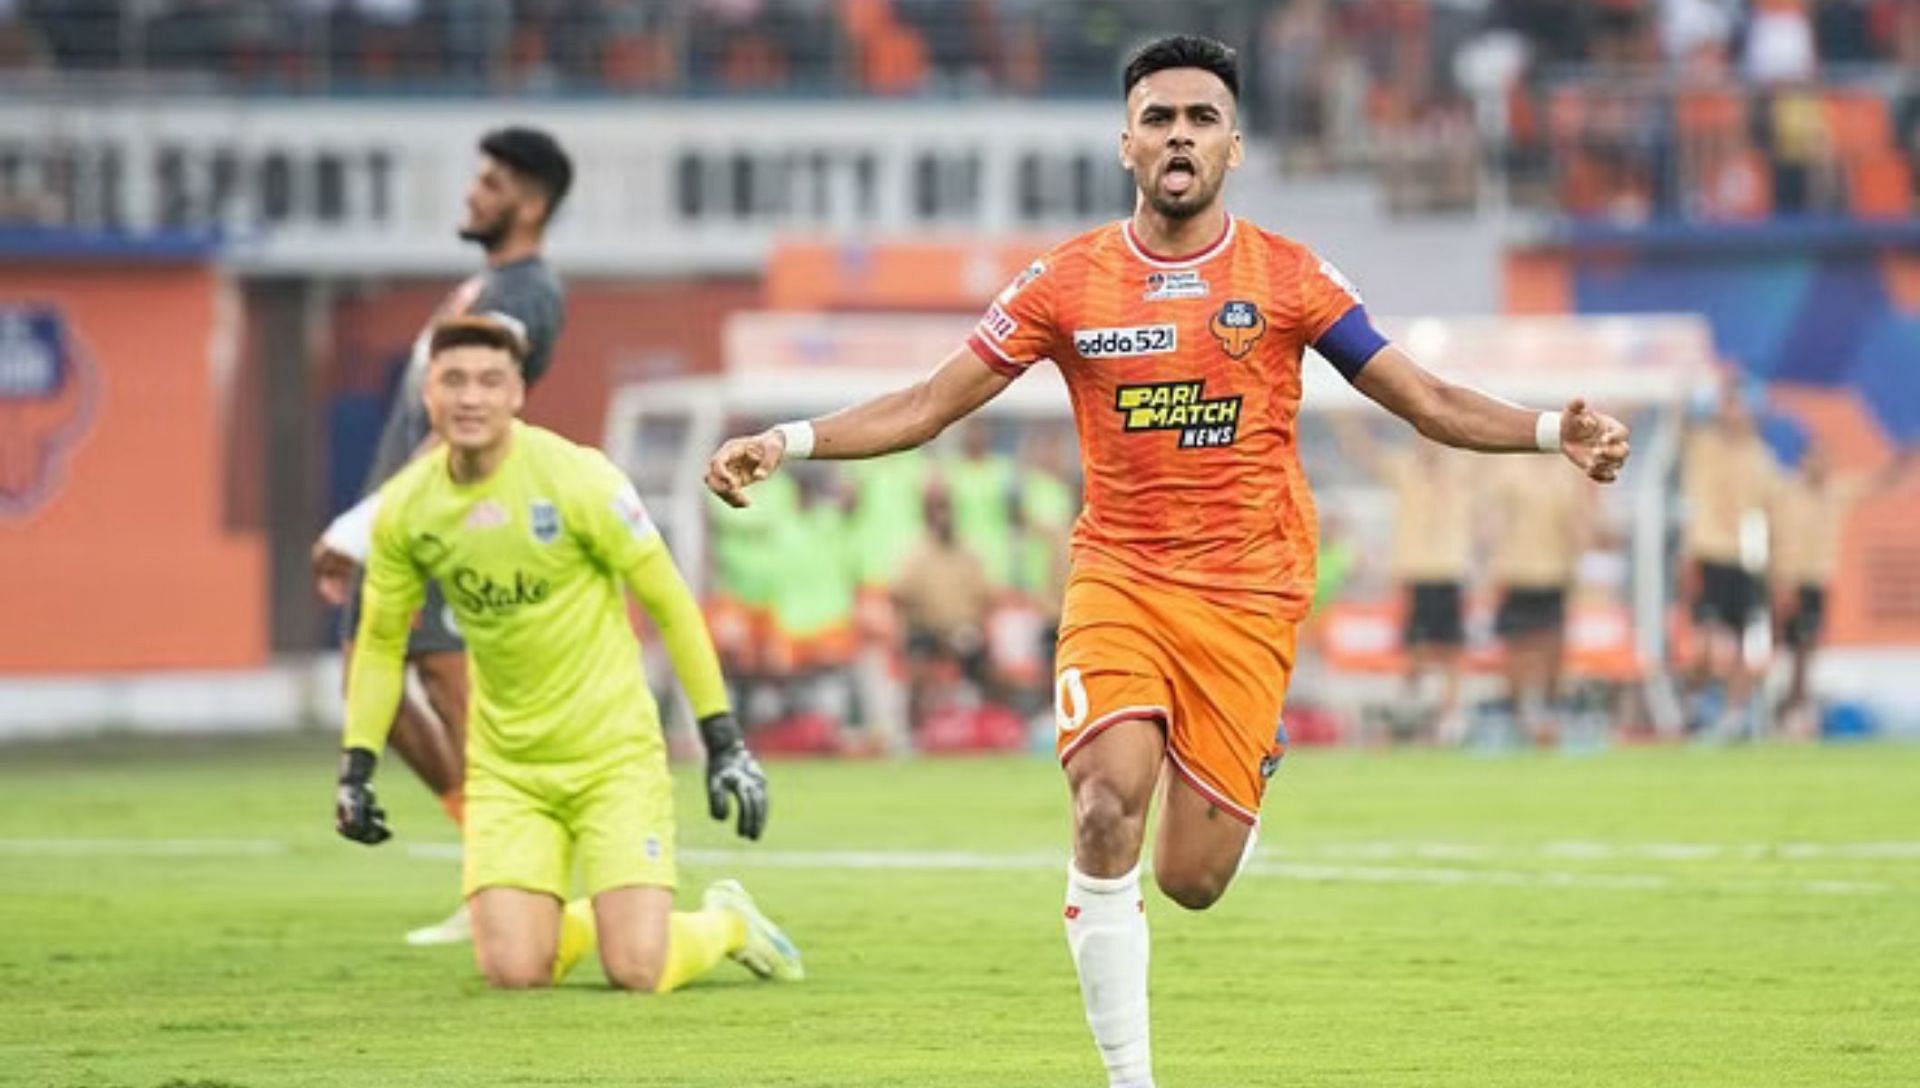 FC Goa midfielder Brandon Fernandes is all set to join Mumbai City FC on a free transfer, according to IFTWC - Indian Football